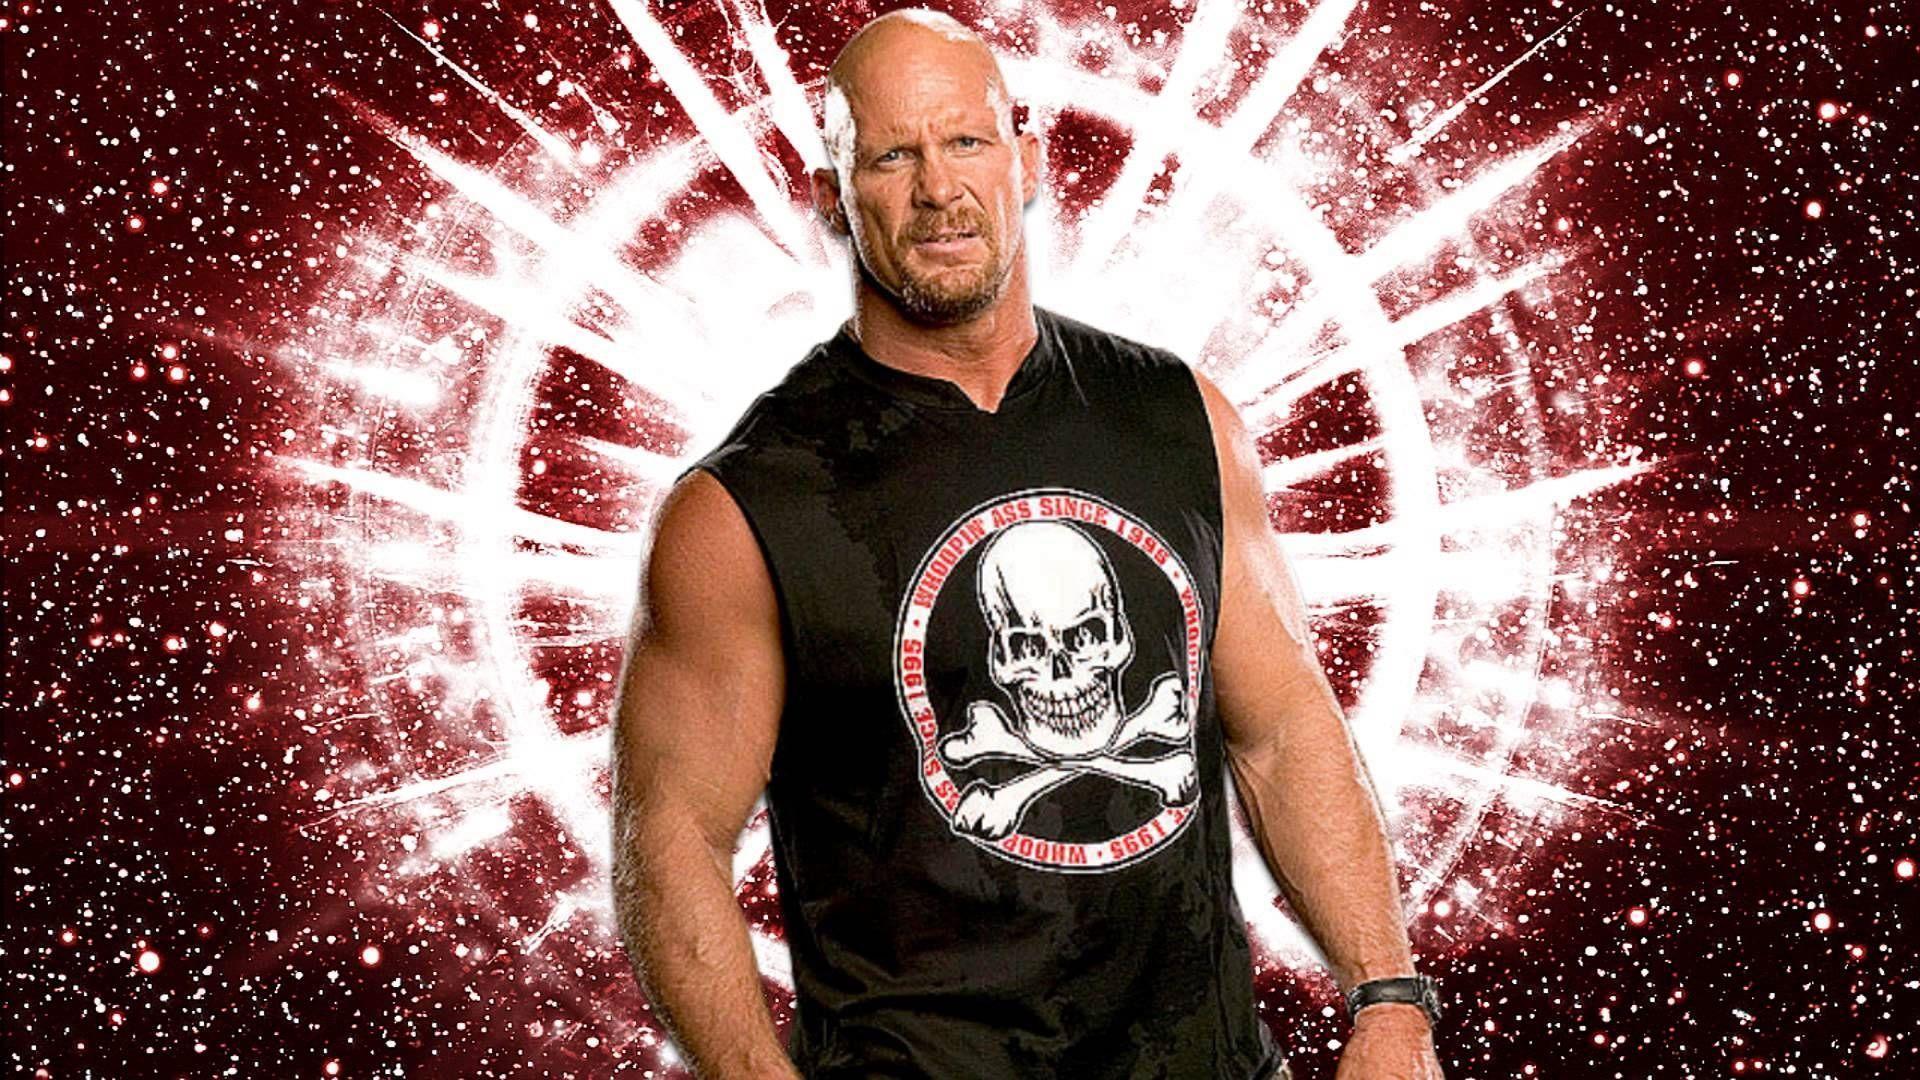 Stone Cold Steve Austin Wallpapers 3 16 Hd Free.